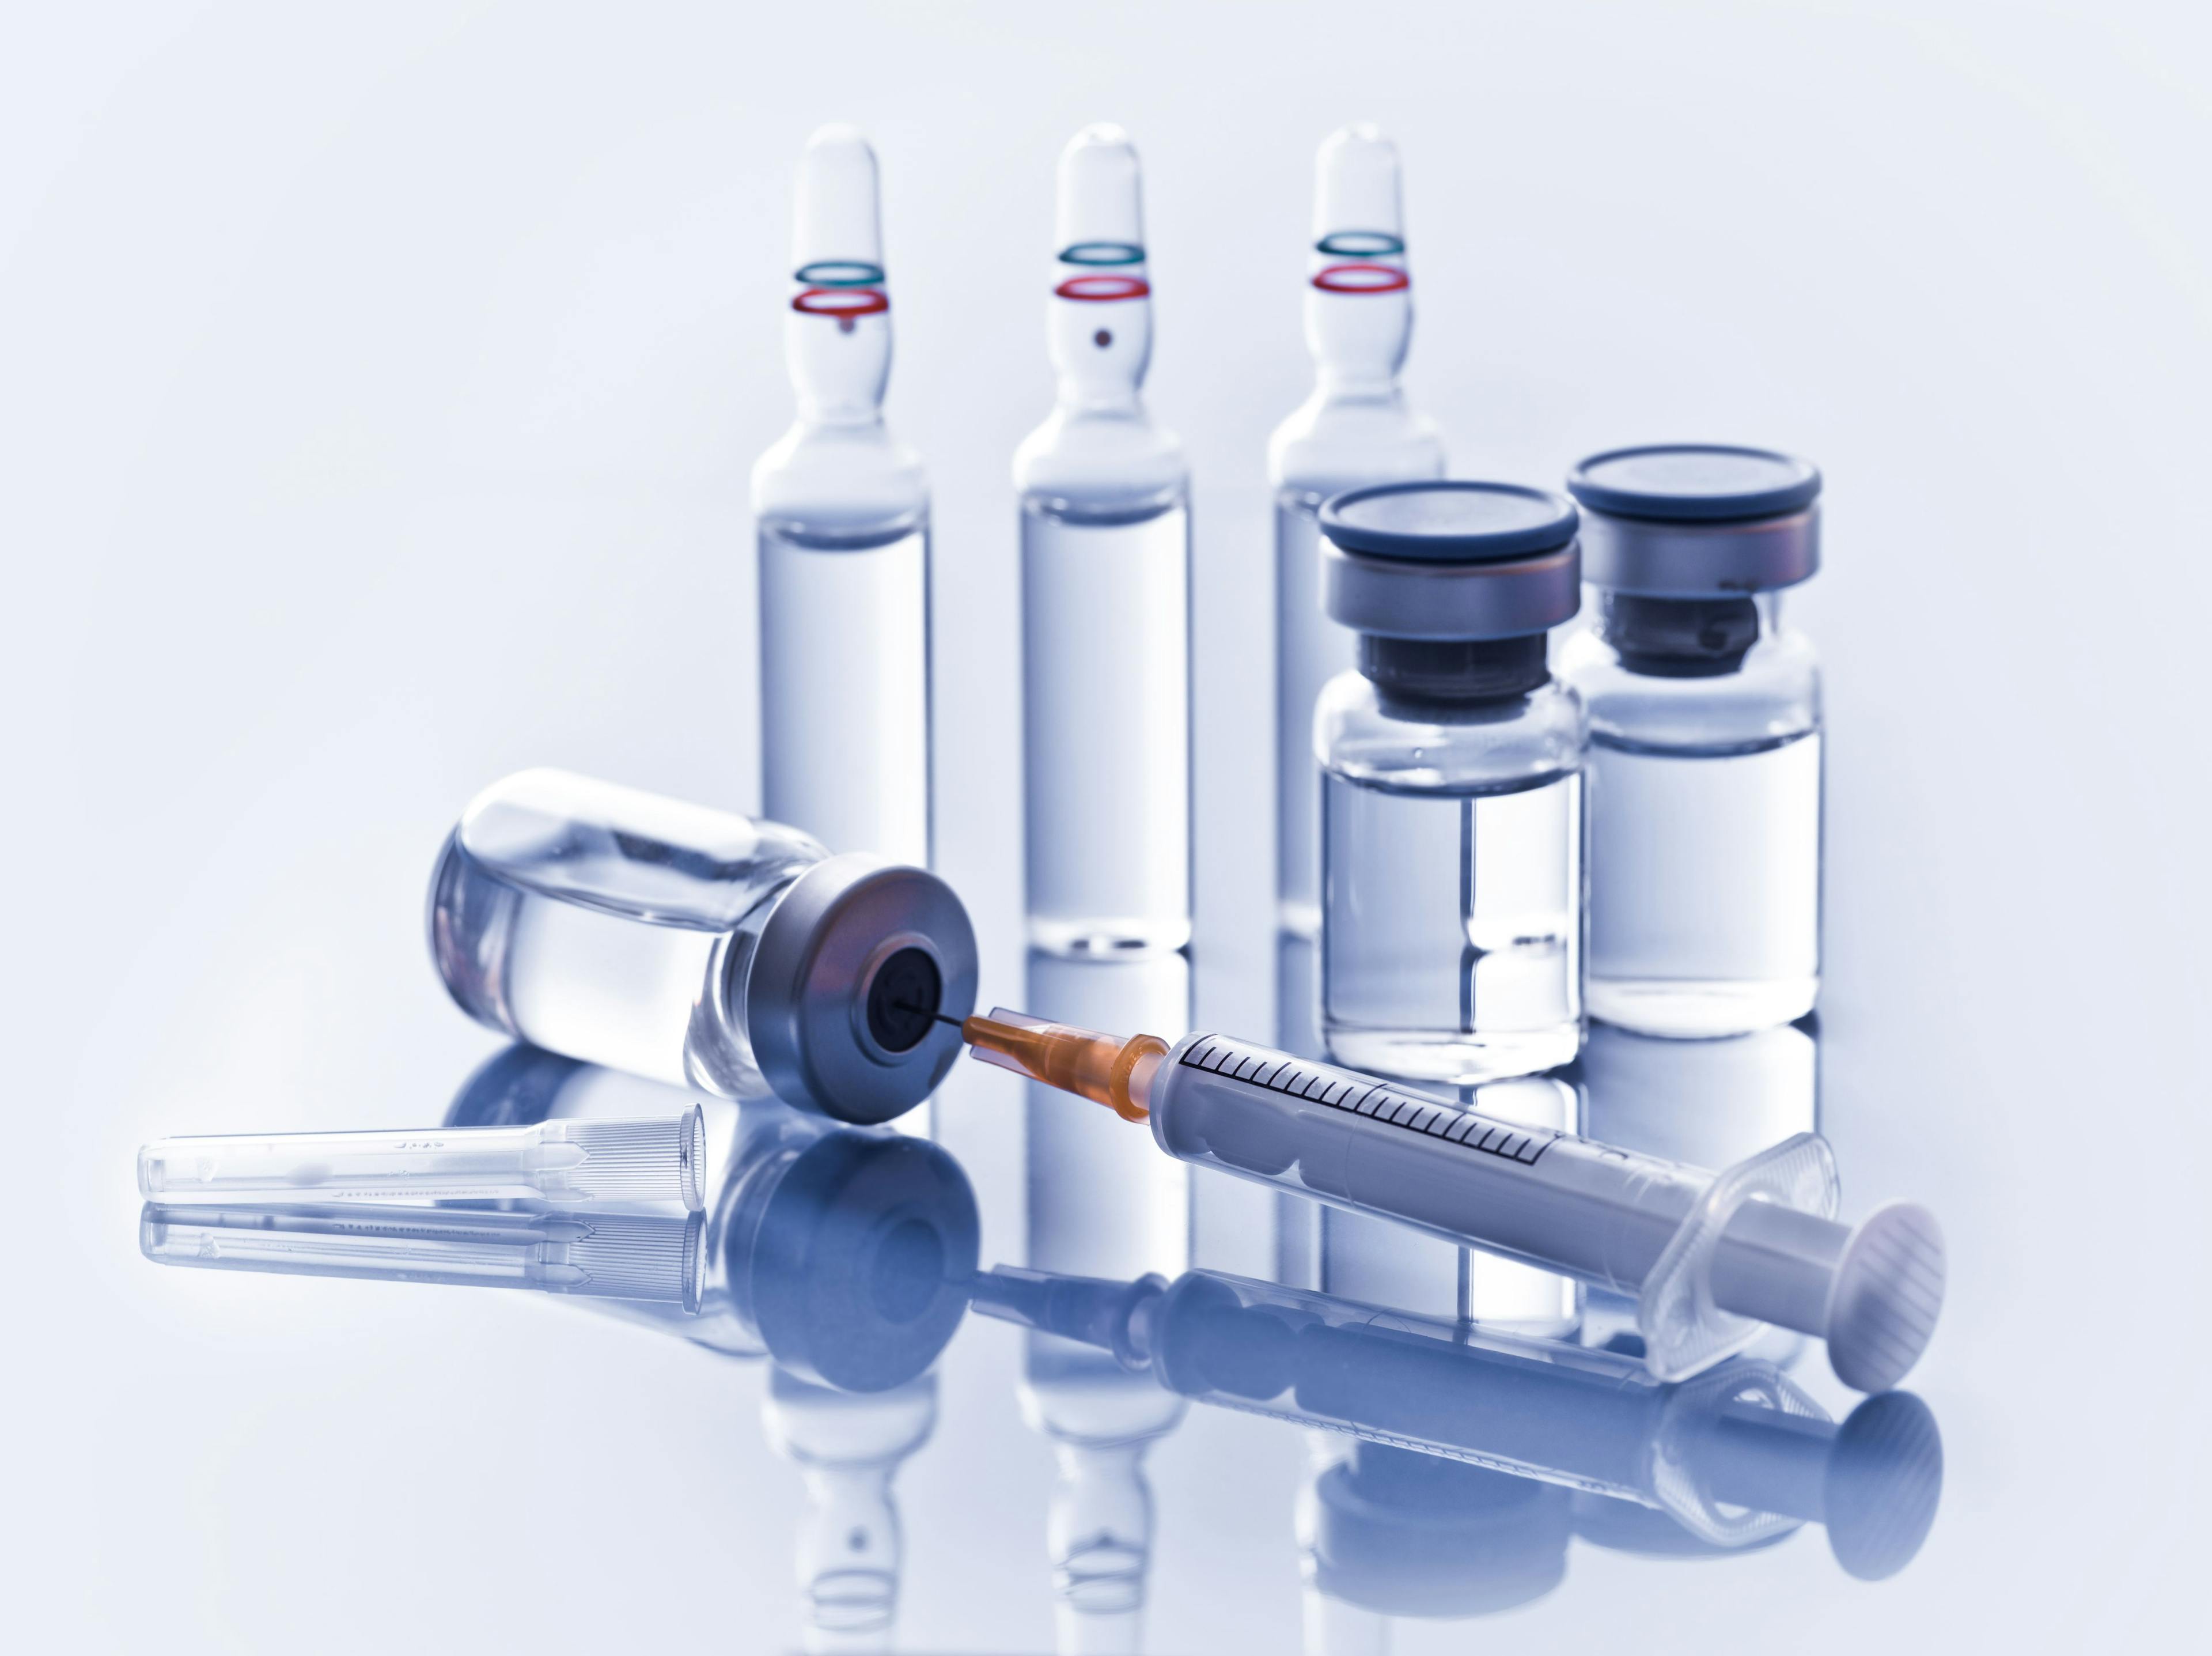 Store, Handle, and Administer Vaccines Safely to Prevent Errors